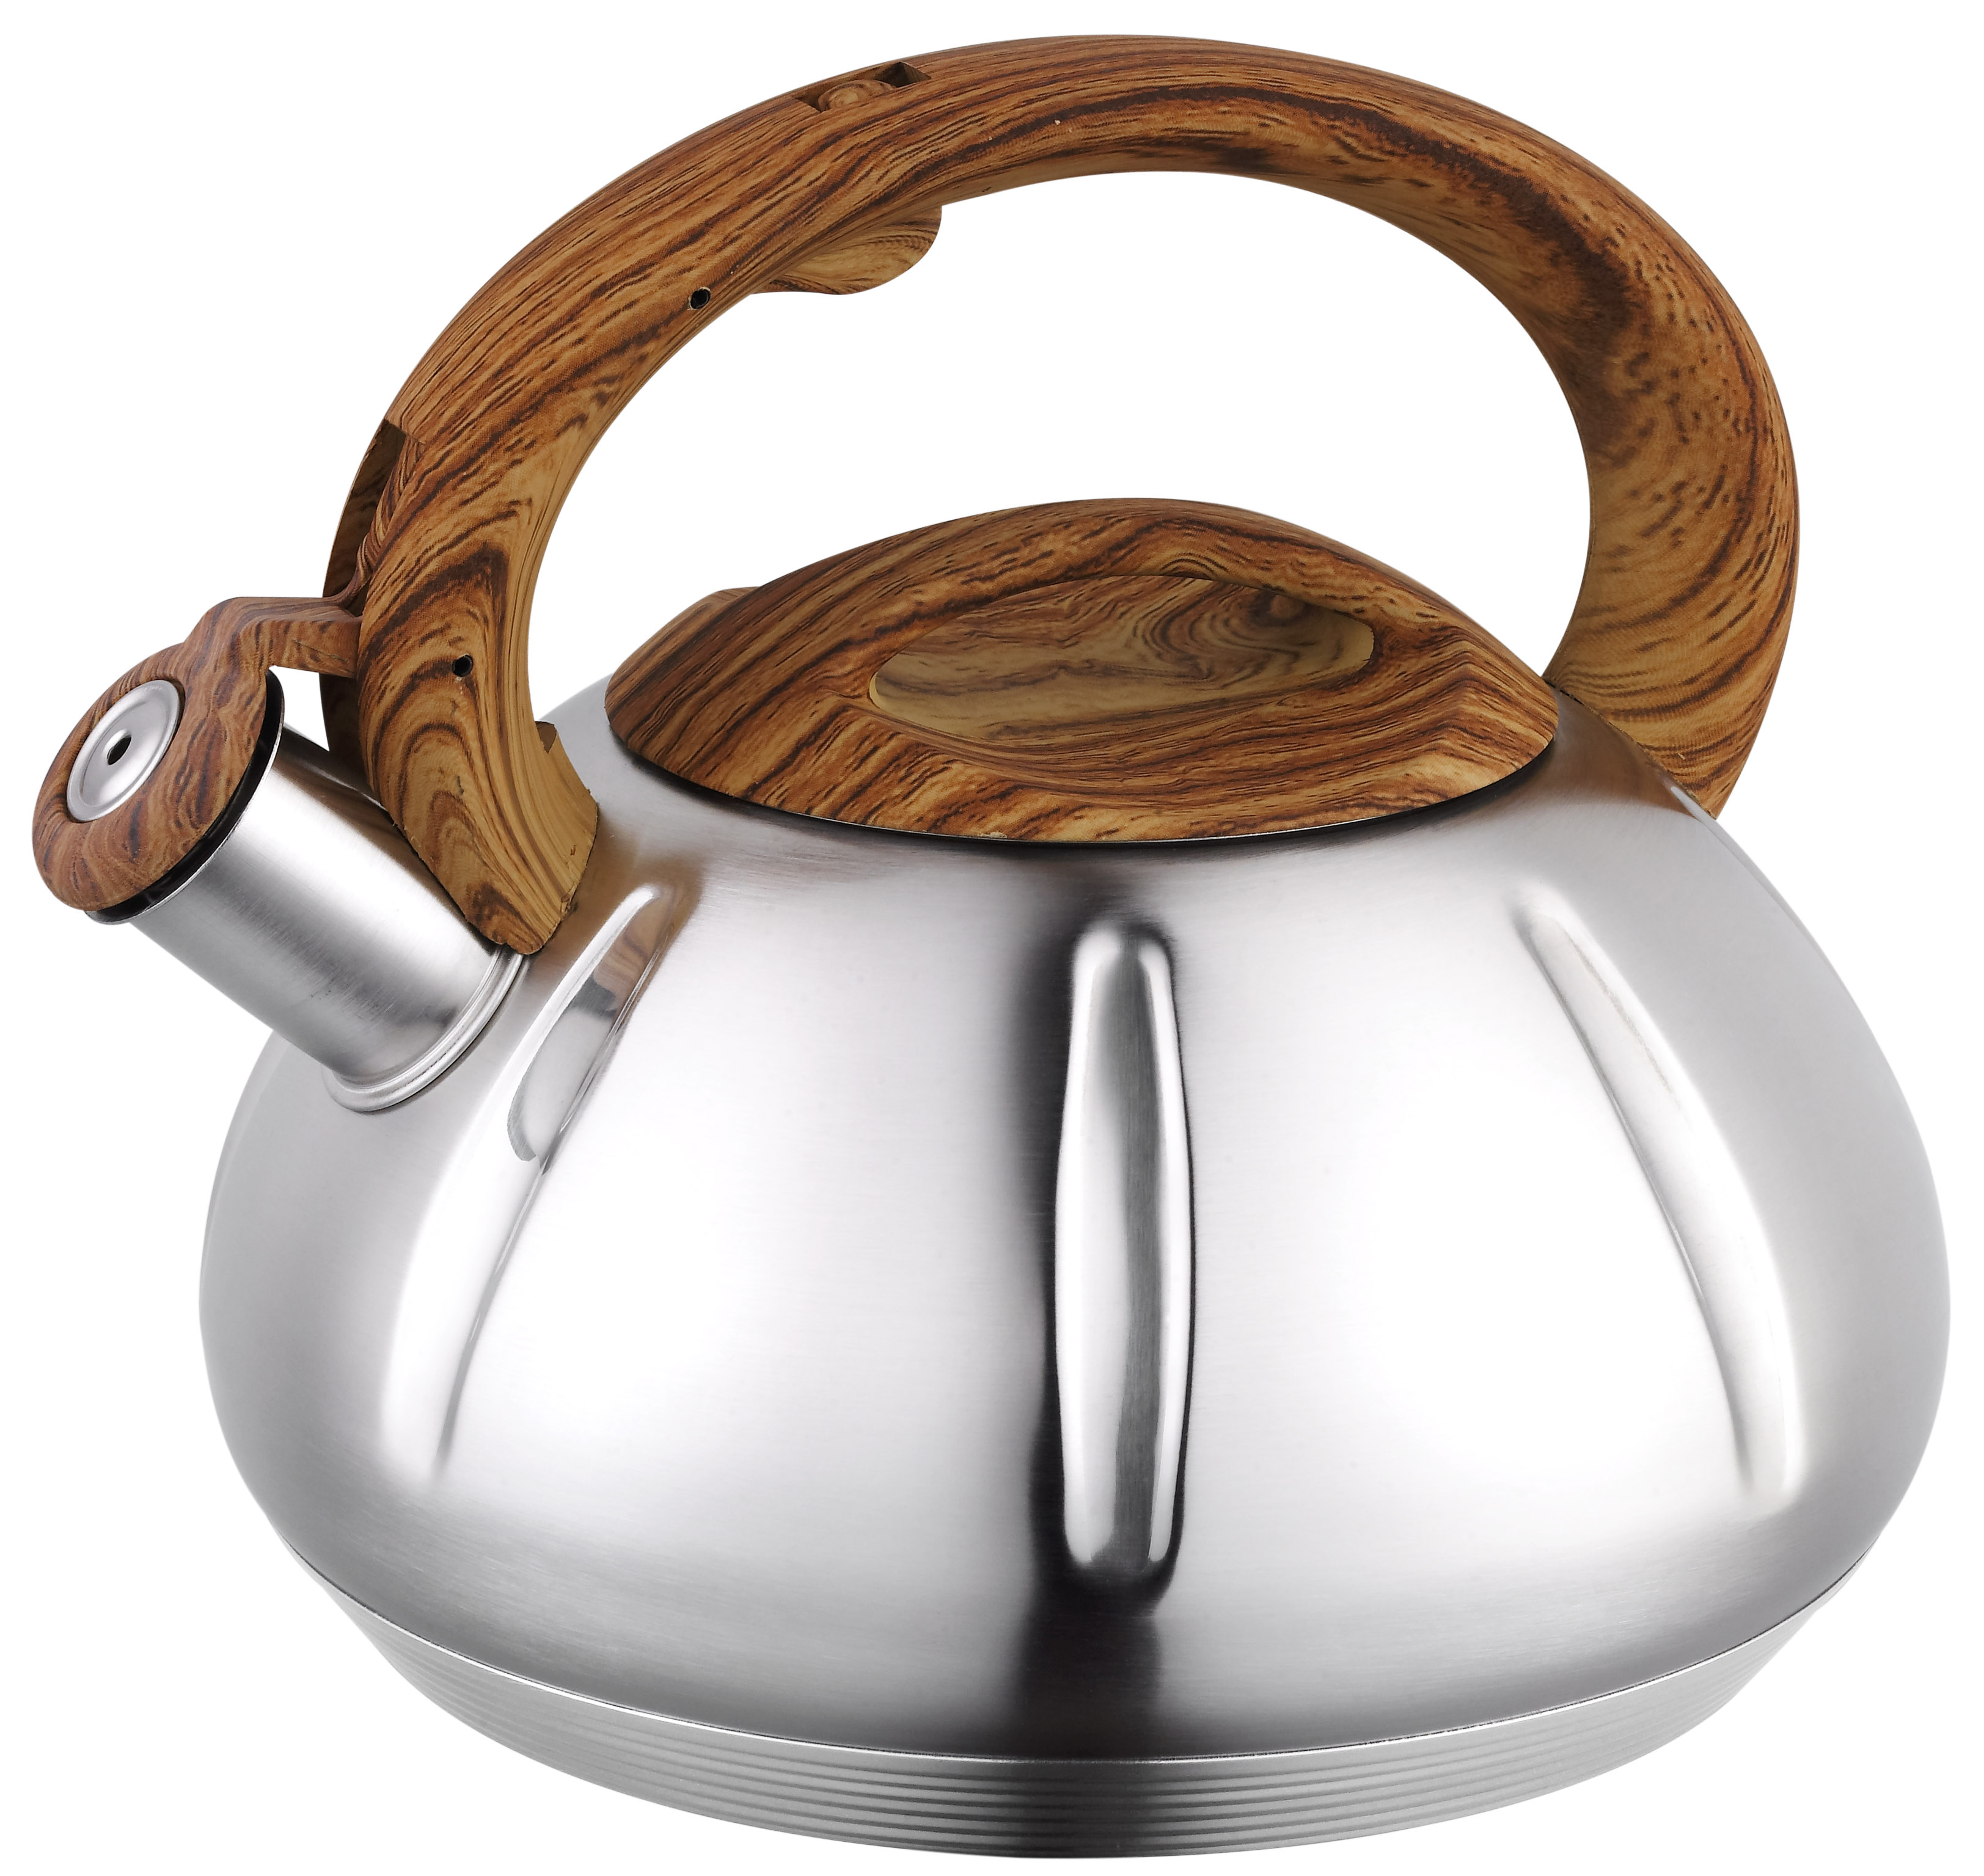 High-quality 3L Whistling Tea Kettle Stainless Steel The Best Whistling Kettle 